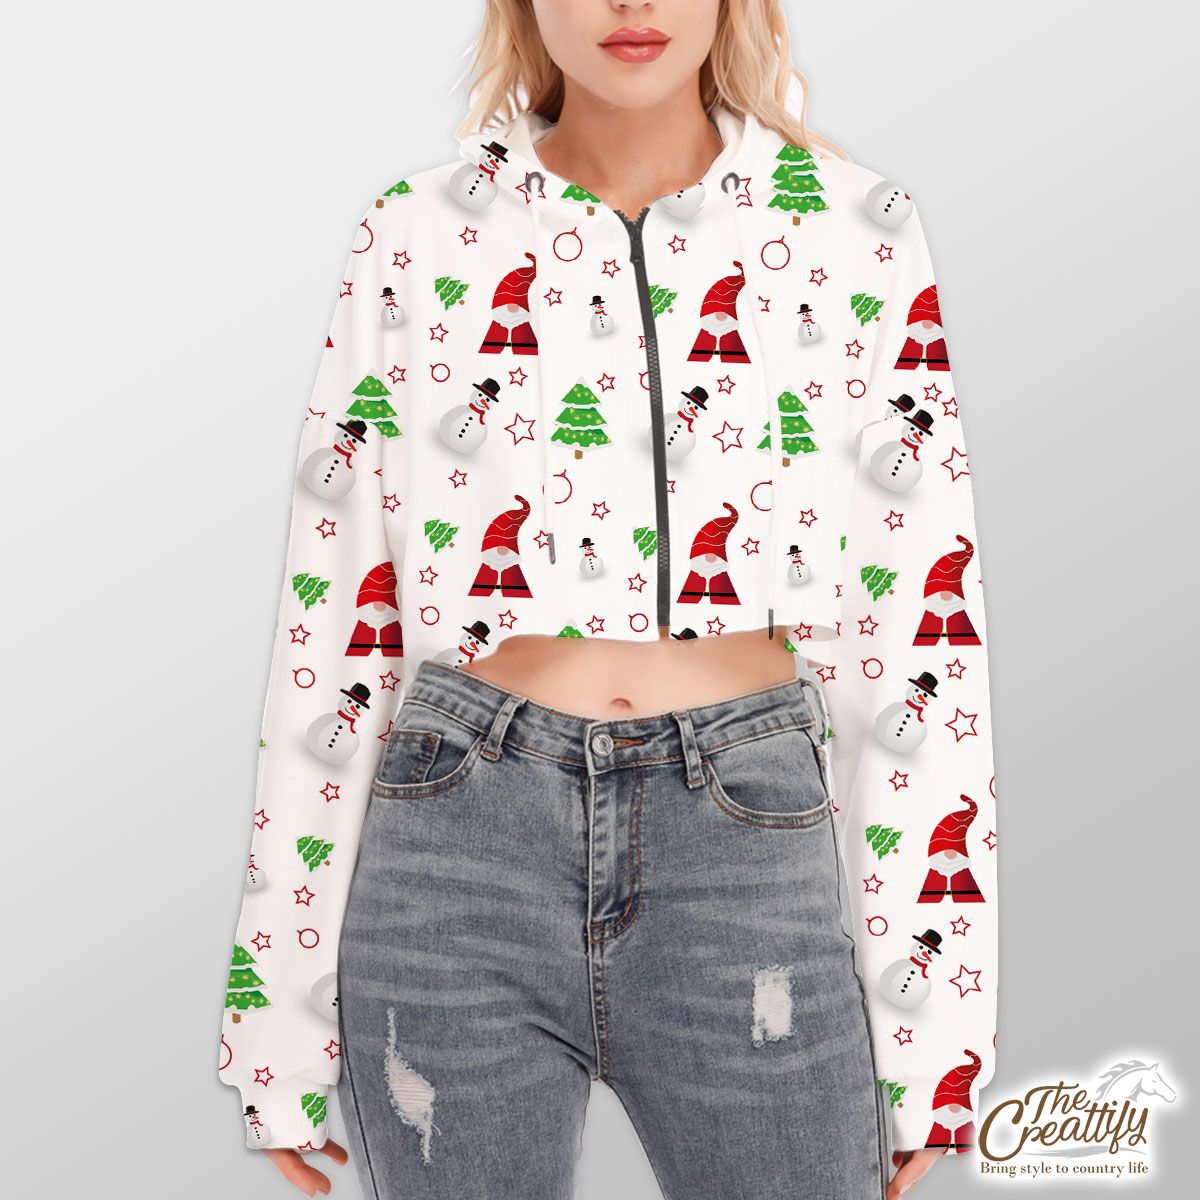 Santa Claus, Snowman Clipart And Pine Tree Silhouette Seamless Pattern Hoodie With Zipper Closure